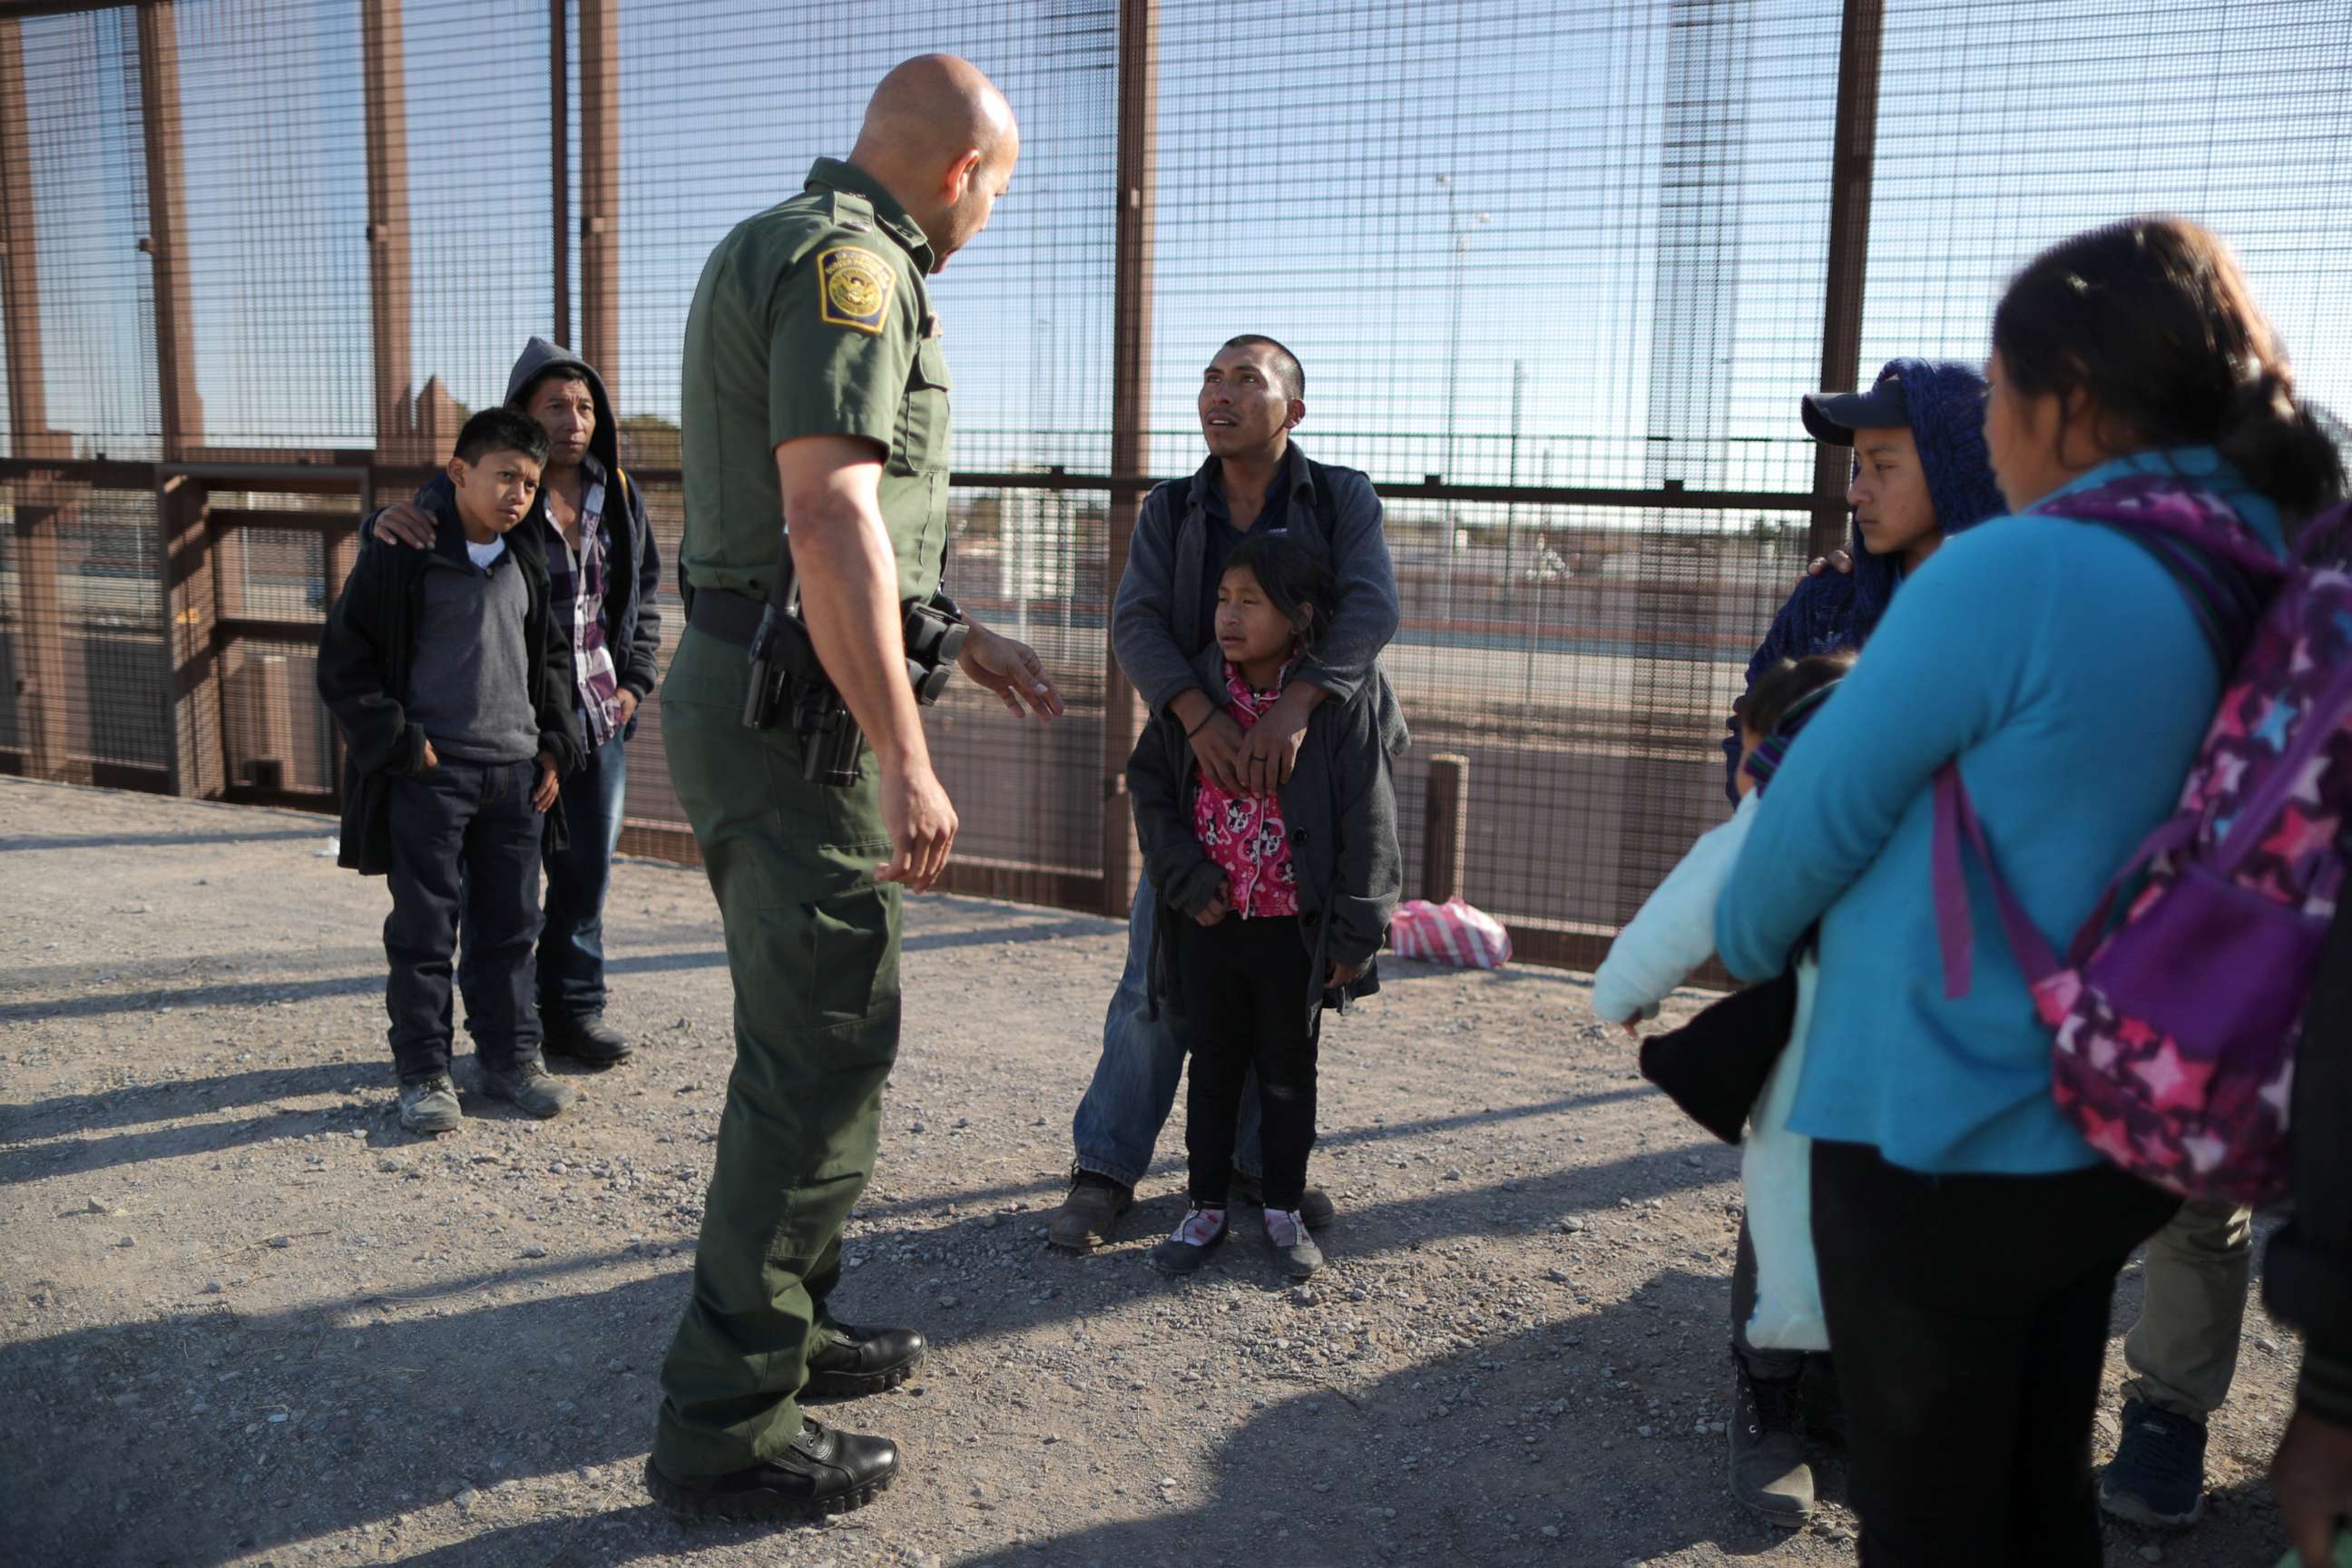 PHOTO: A group of Central American migrants is questioned about their children's health after surrendering to U.S. Border Patrol Agents south of the U.S.-Mexico border fence in El Paso, Texas, March 6, 2019.